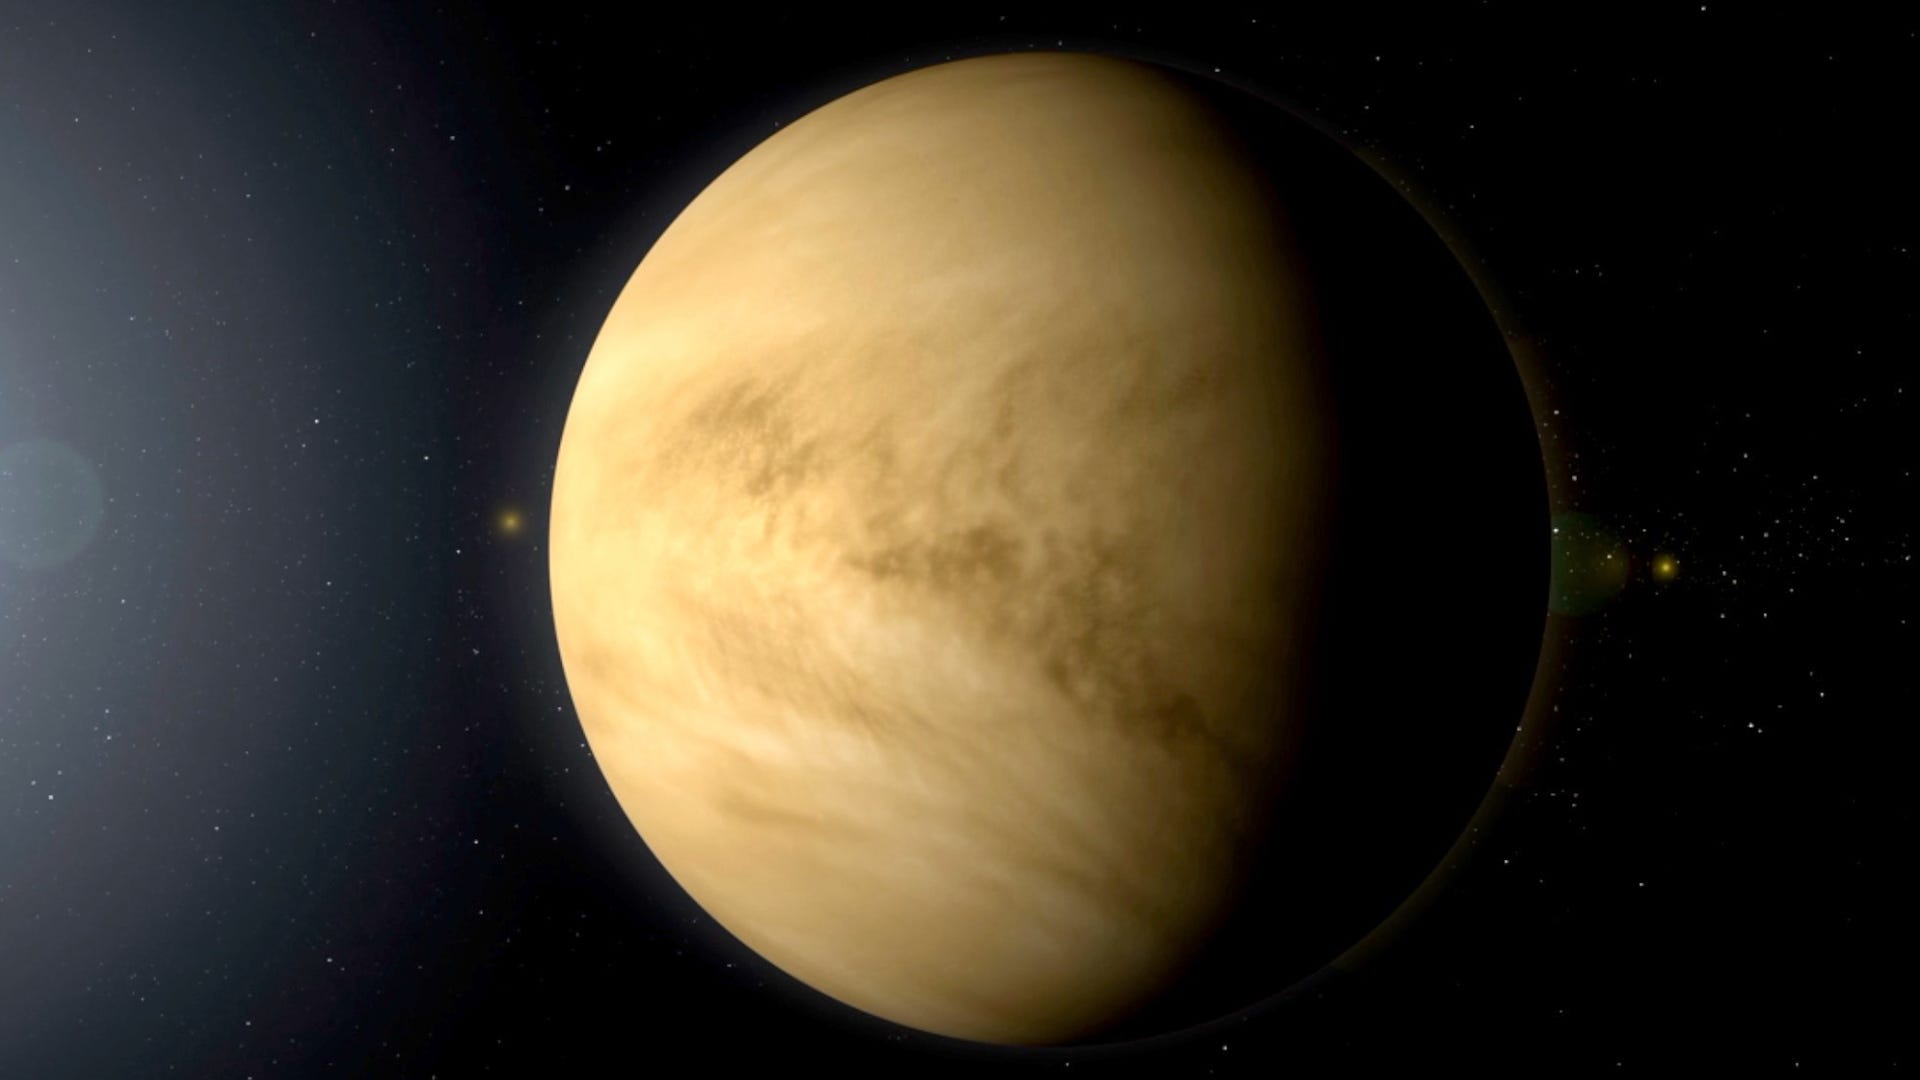 NASA captures close-up flyby images of Venus